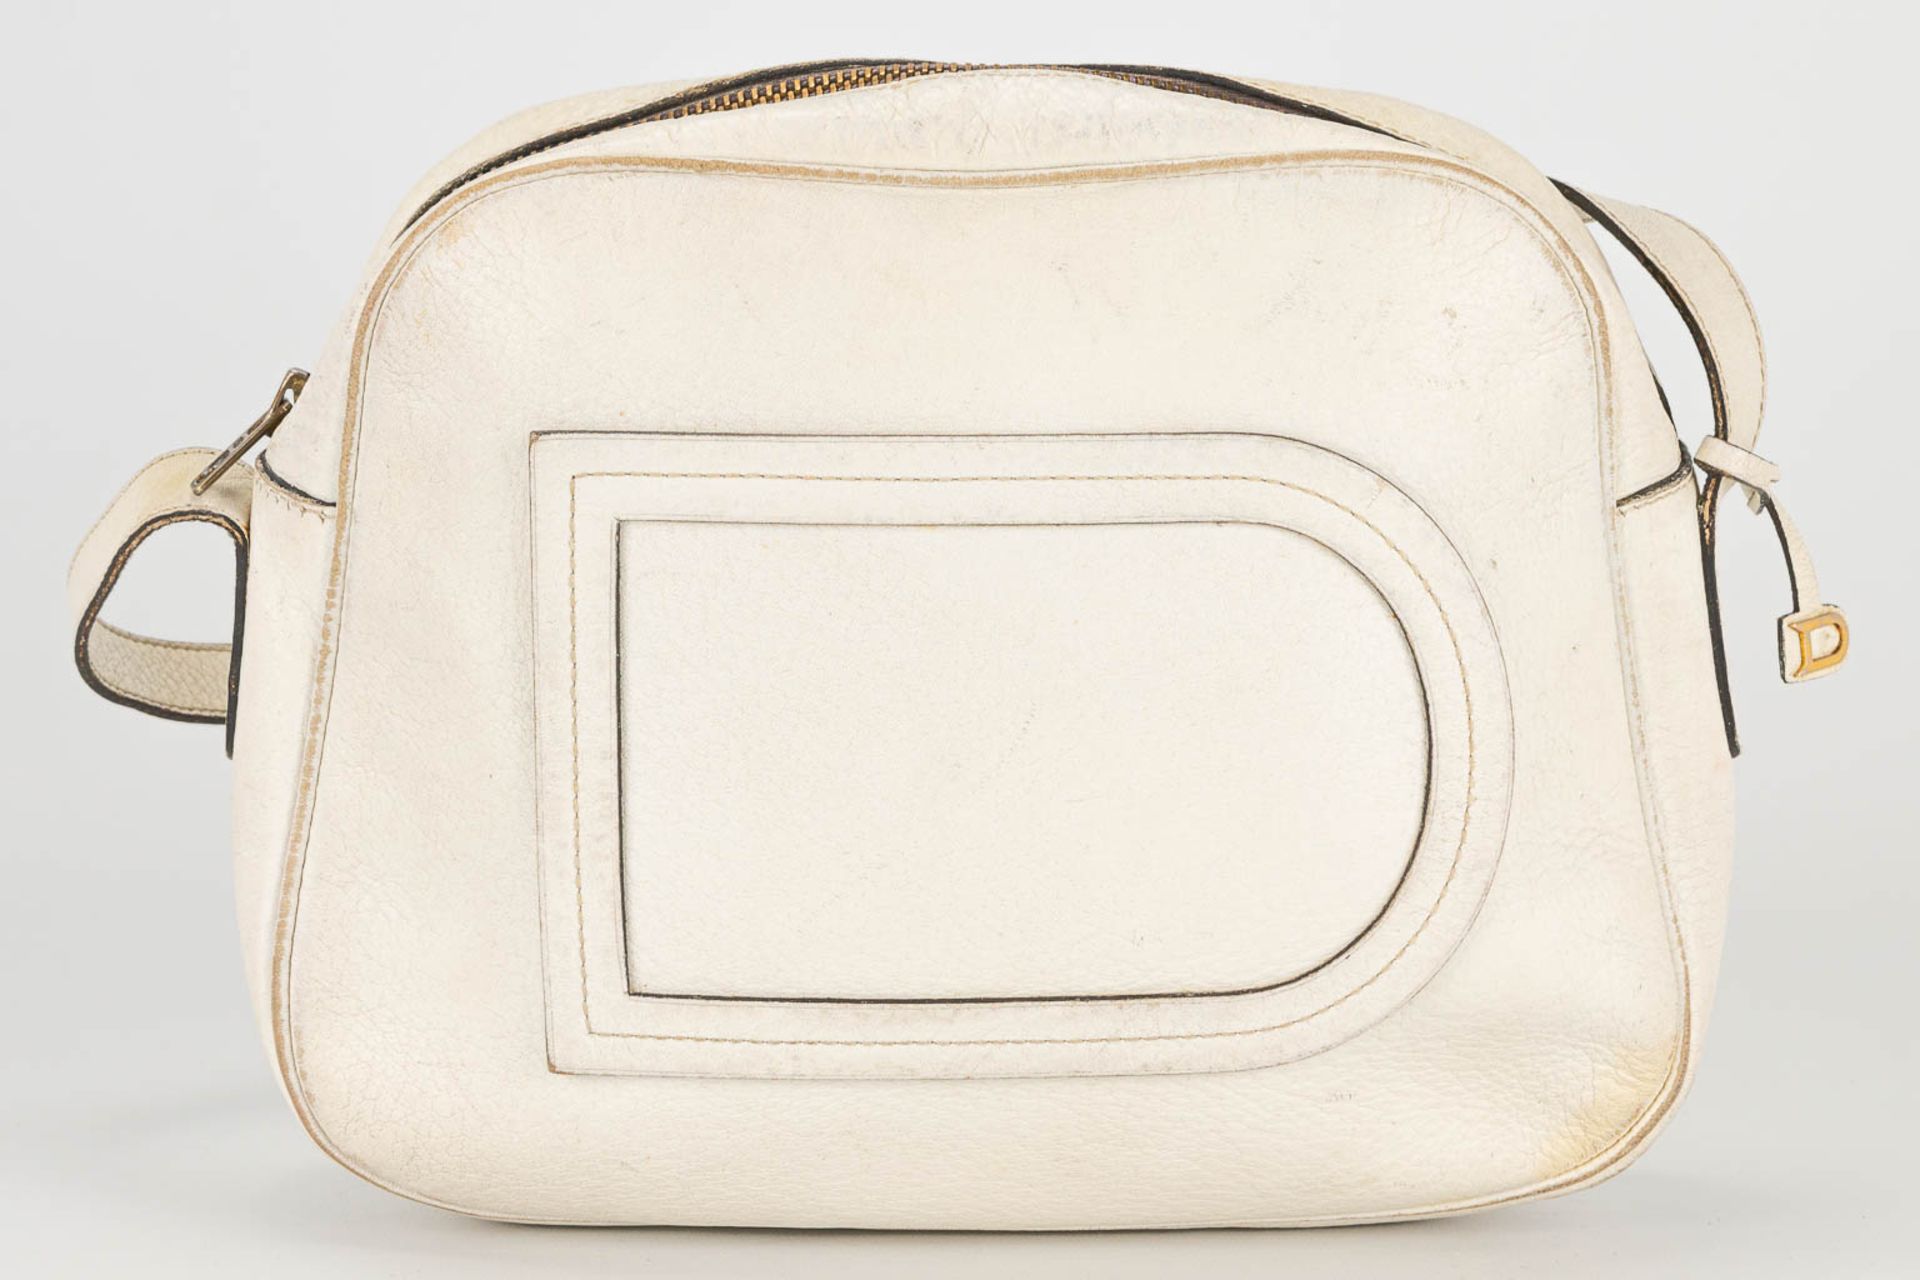 A purse made of white leather and marked Delvaux - Image 6 of 14